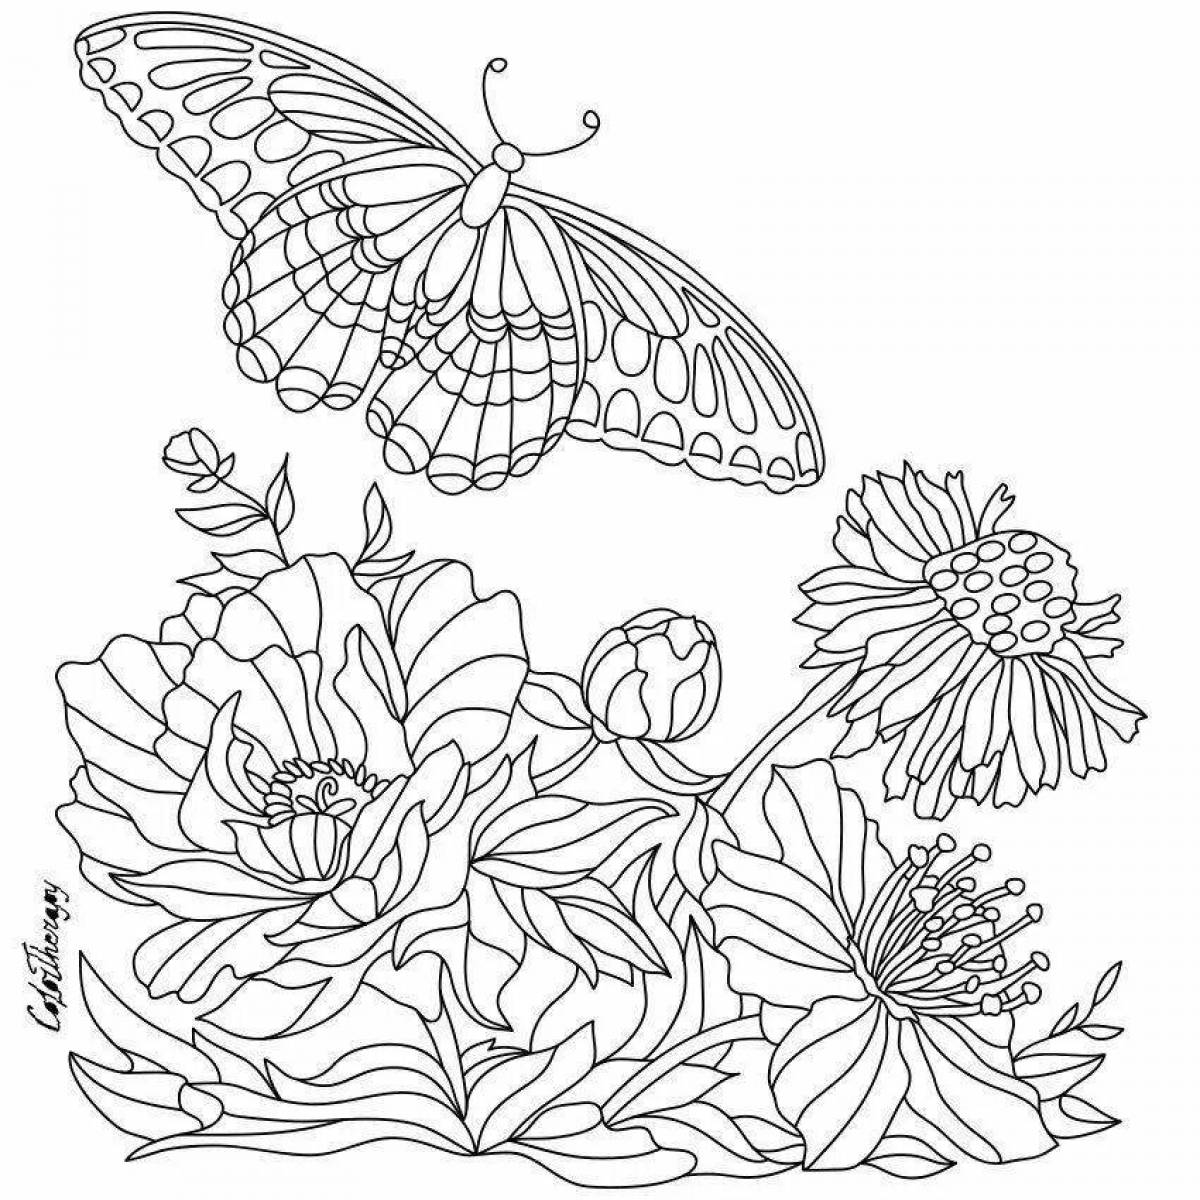 Coloring book exalted flowers and butterflies